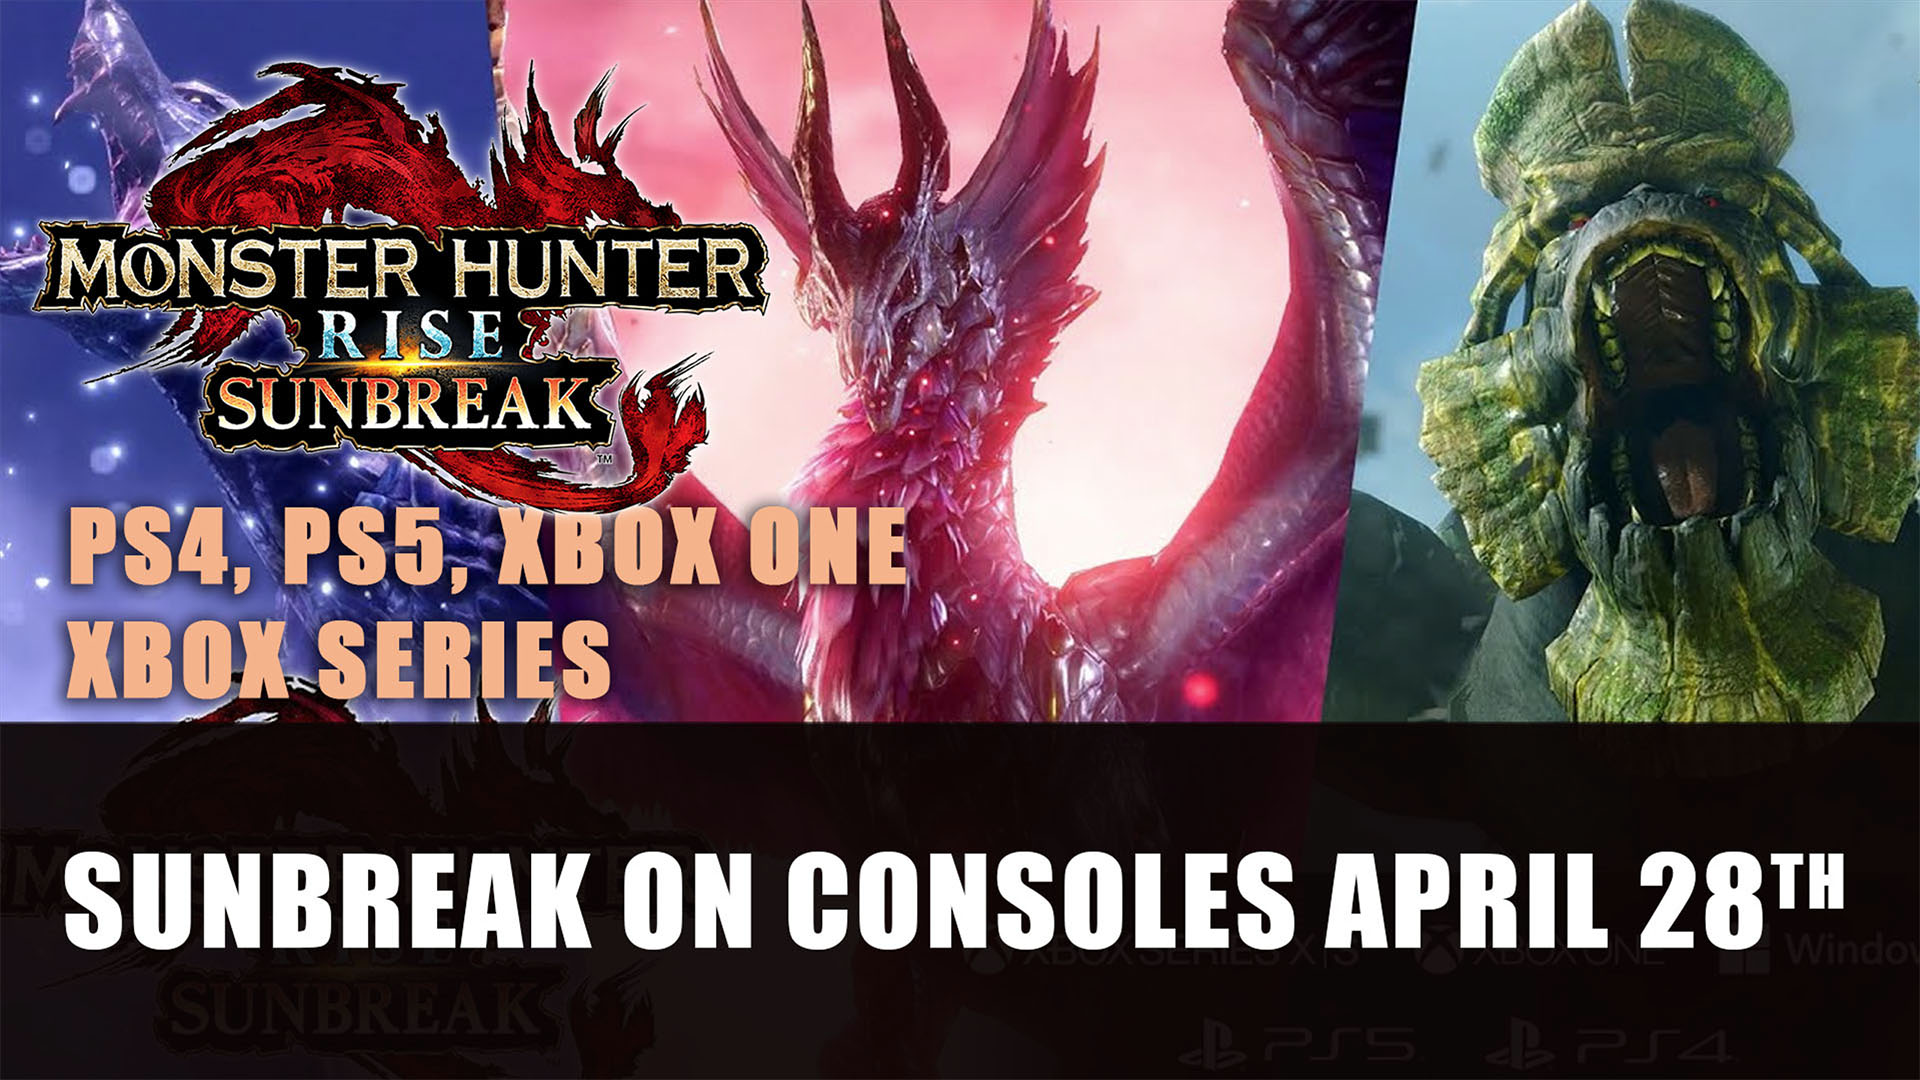 Monster Hunter Rise Sunbreak Expansion Hits PS4, PS5, Xbox One, and Series  X|S in April - Fextralife